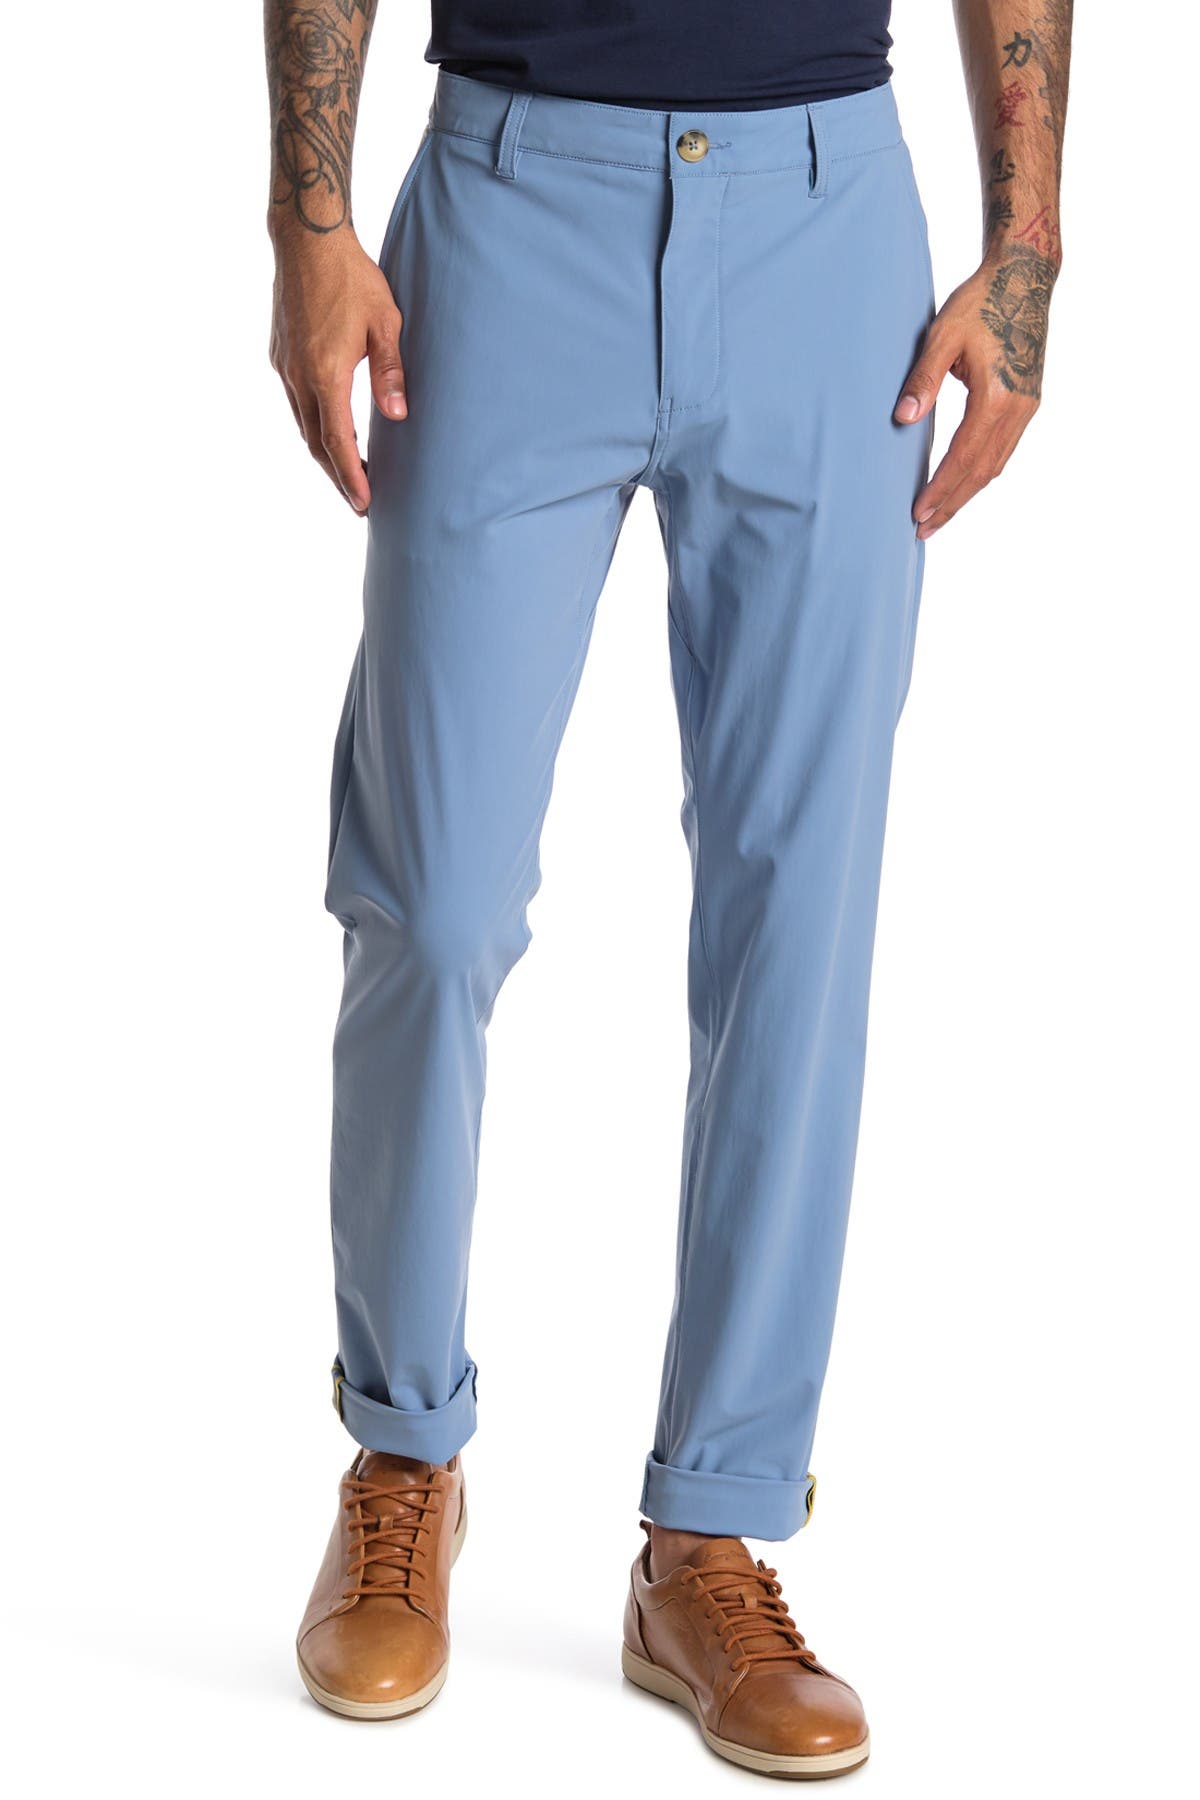 Rhone Eco Legend Chino Pants In Open Blue2